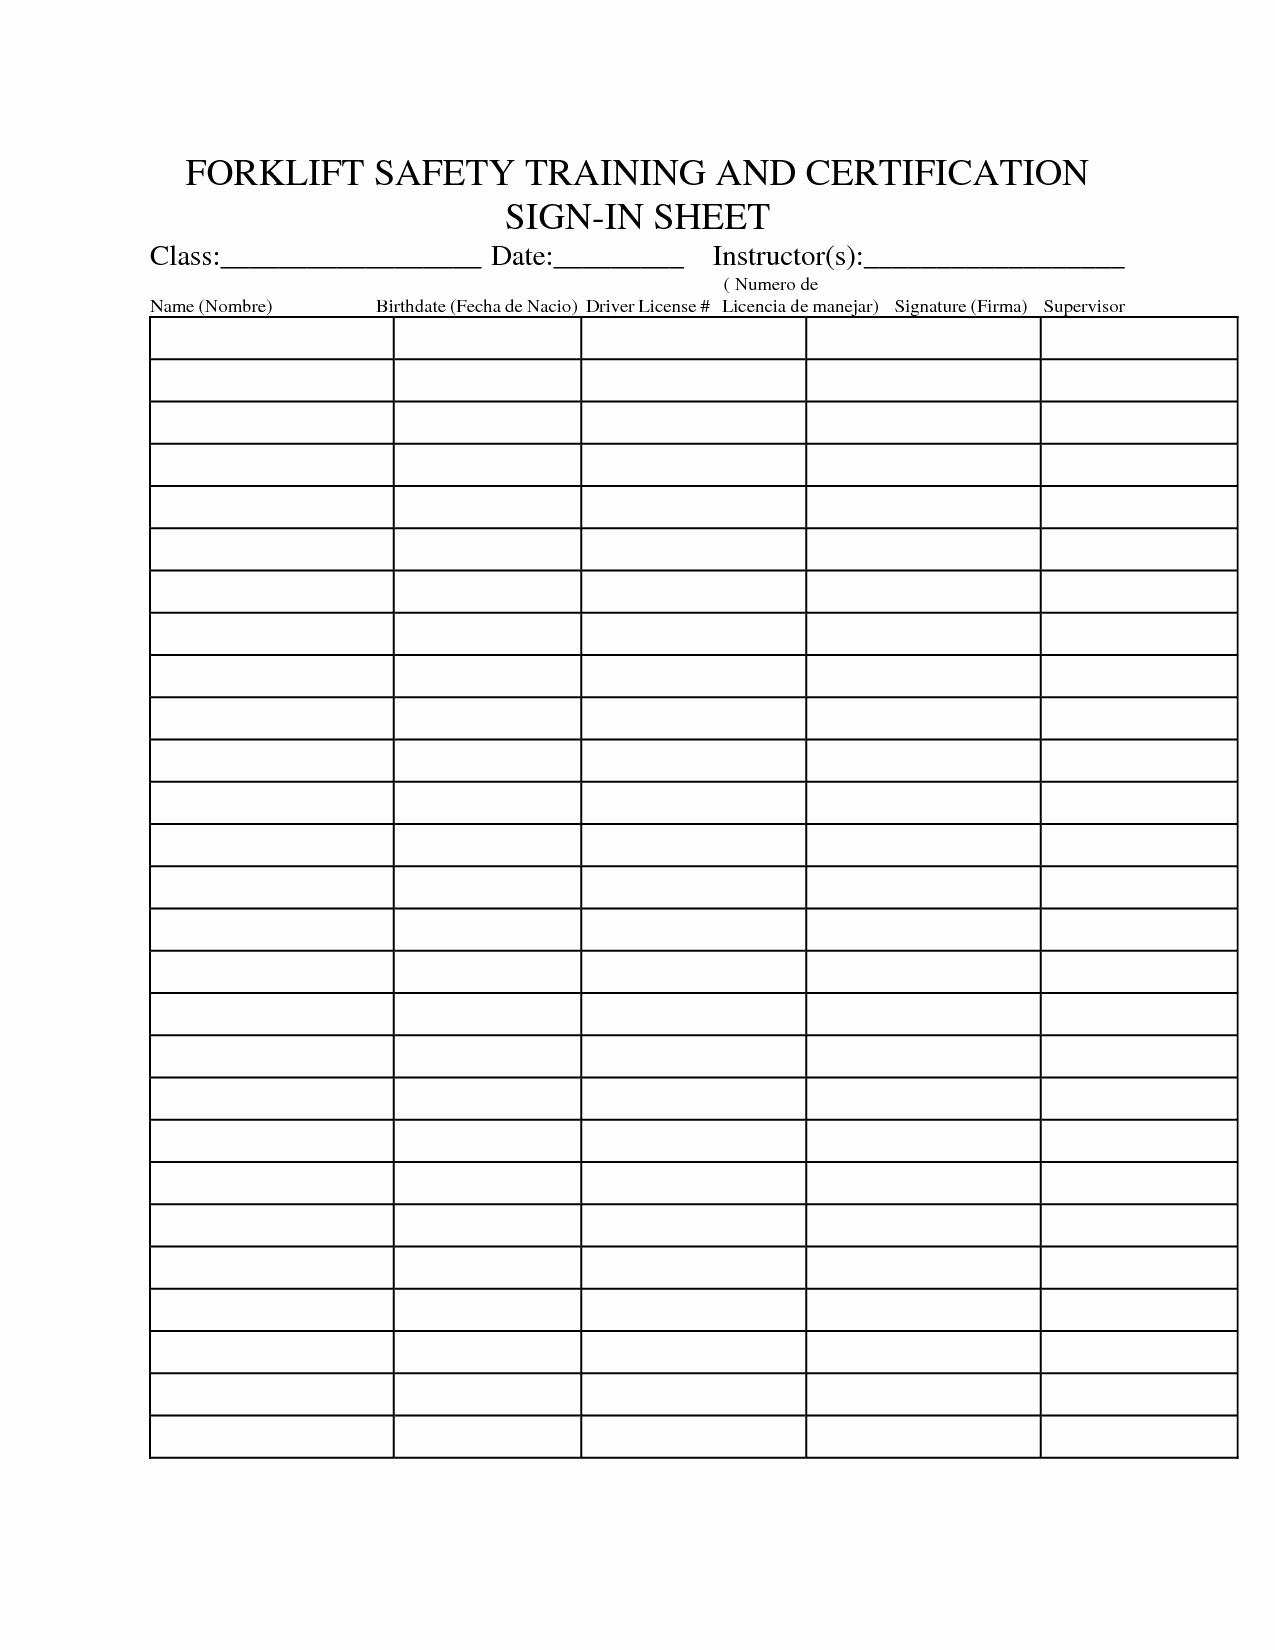 Class Sign In Sheet Template Luxury Best S Of Training Sign In Sheet Template Safety